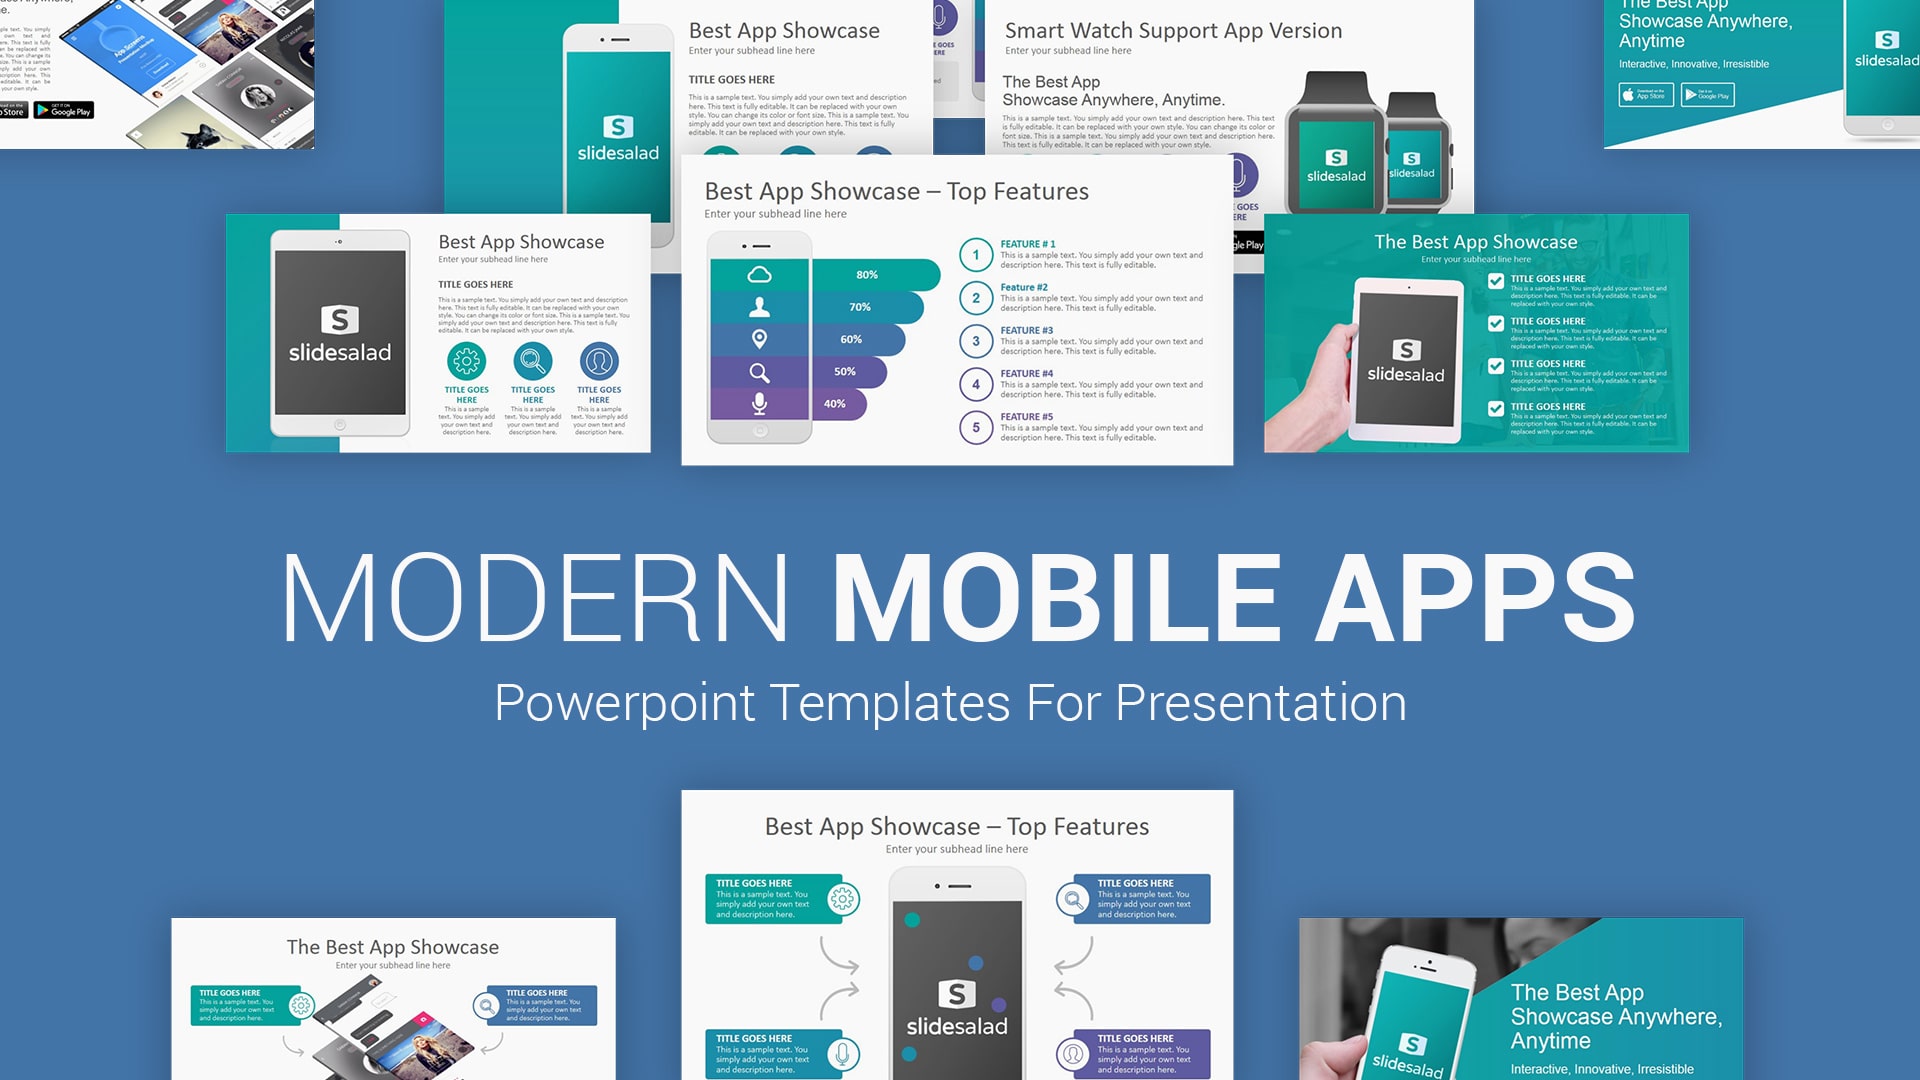 Mobile Application PowerPoint Presentation Template